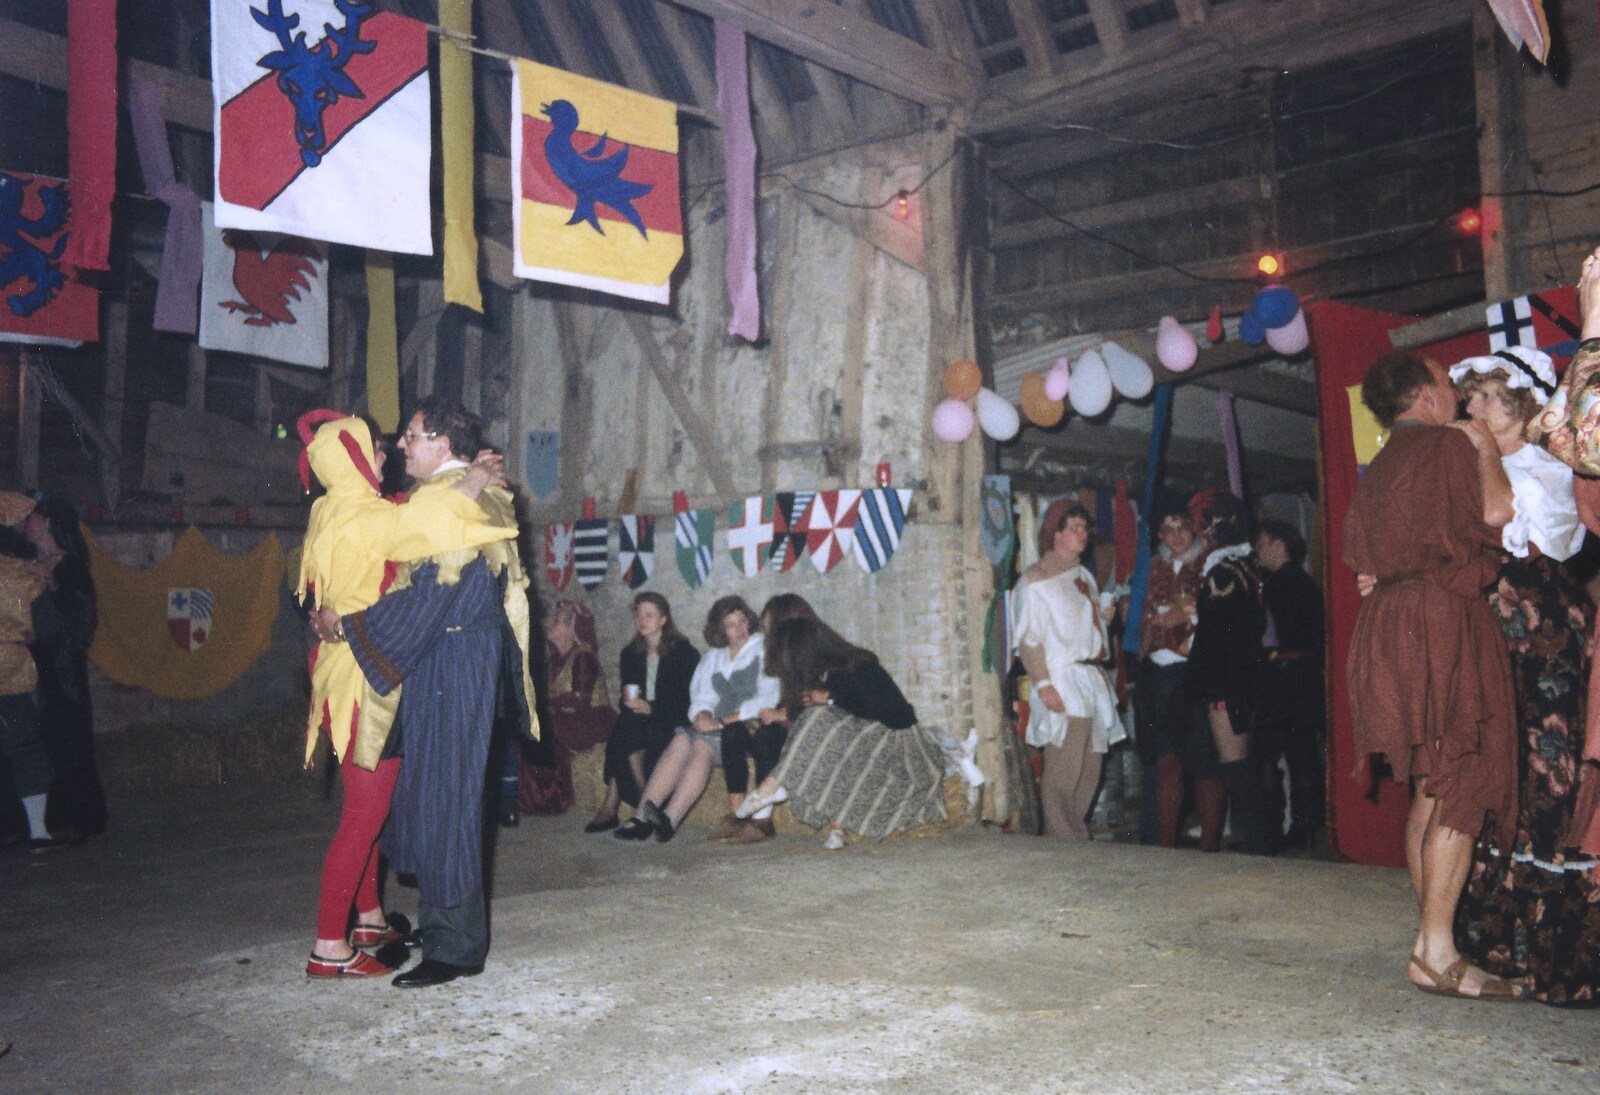 More barn dancing from A Mediaeval Birthday Party, Starston, Norfolk - 27th July 1990